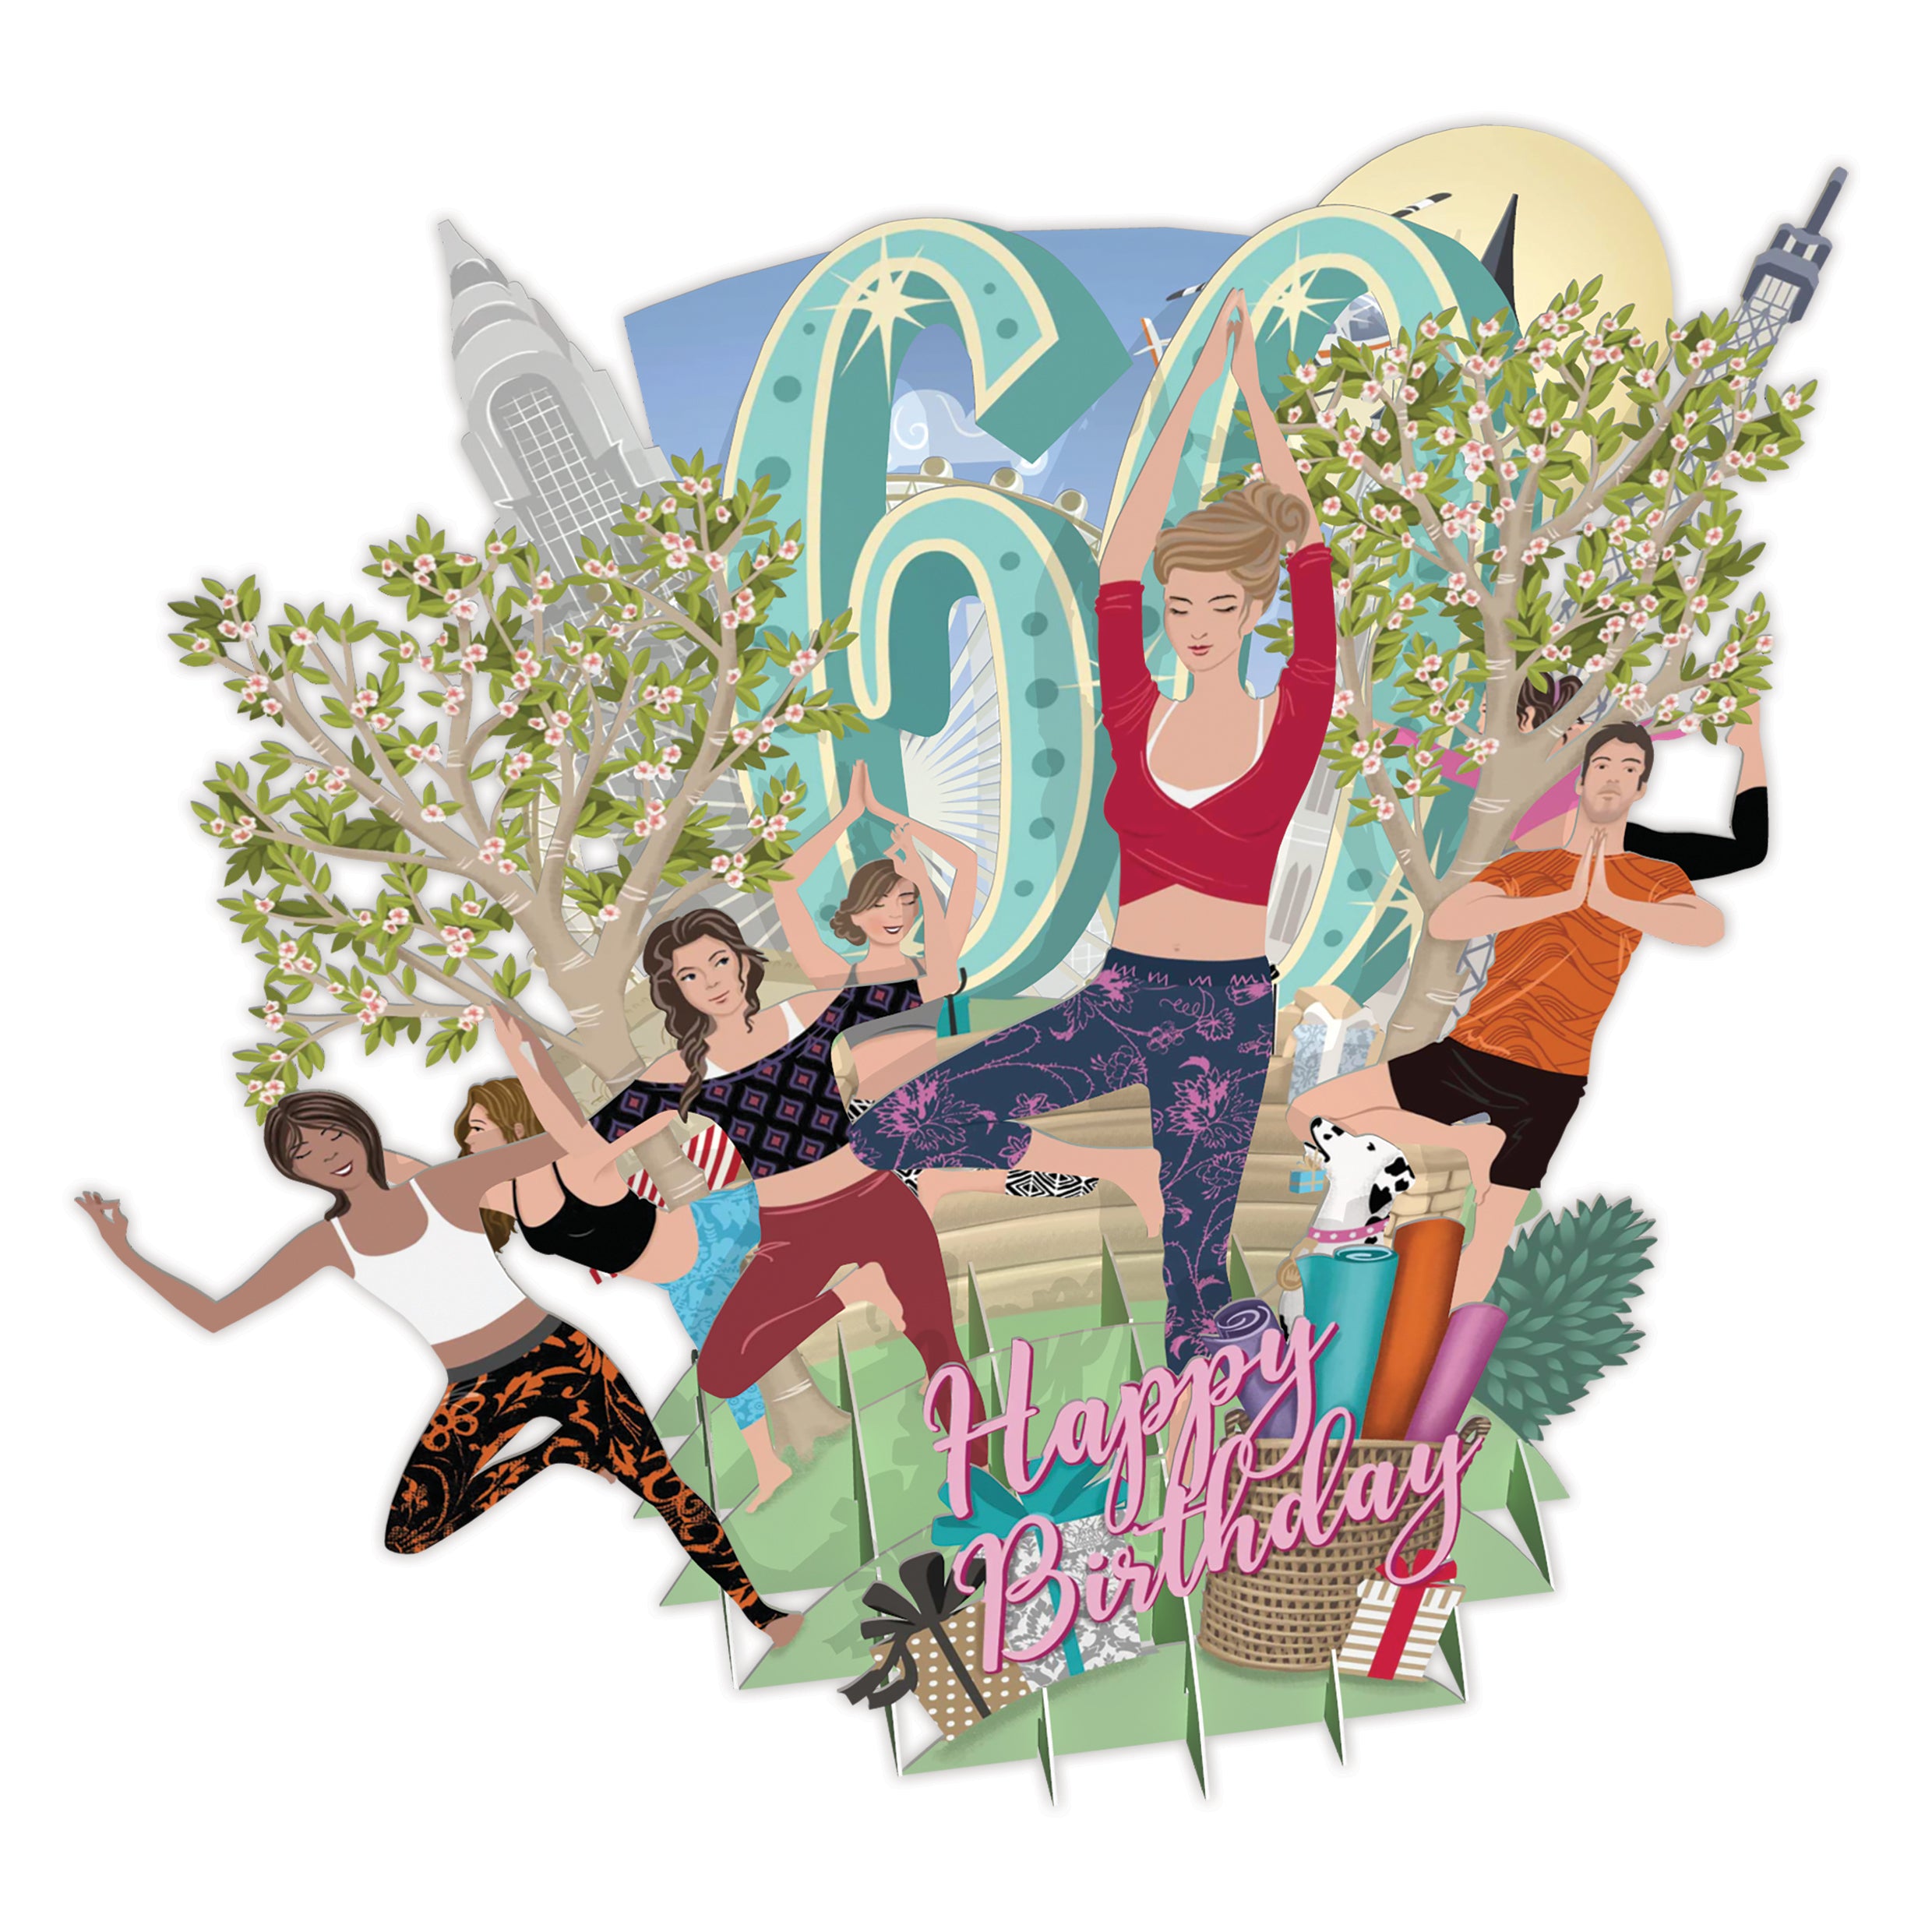 &quot;60 Today Yoga World&quot; - Top of the World Pop Up Greetings Card